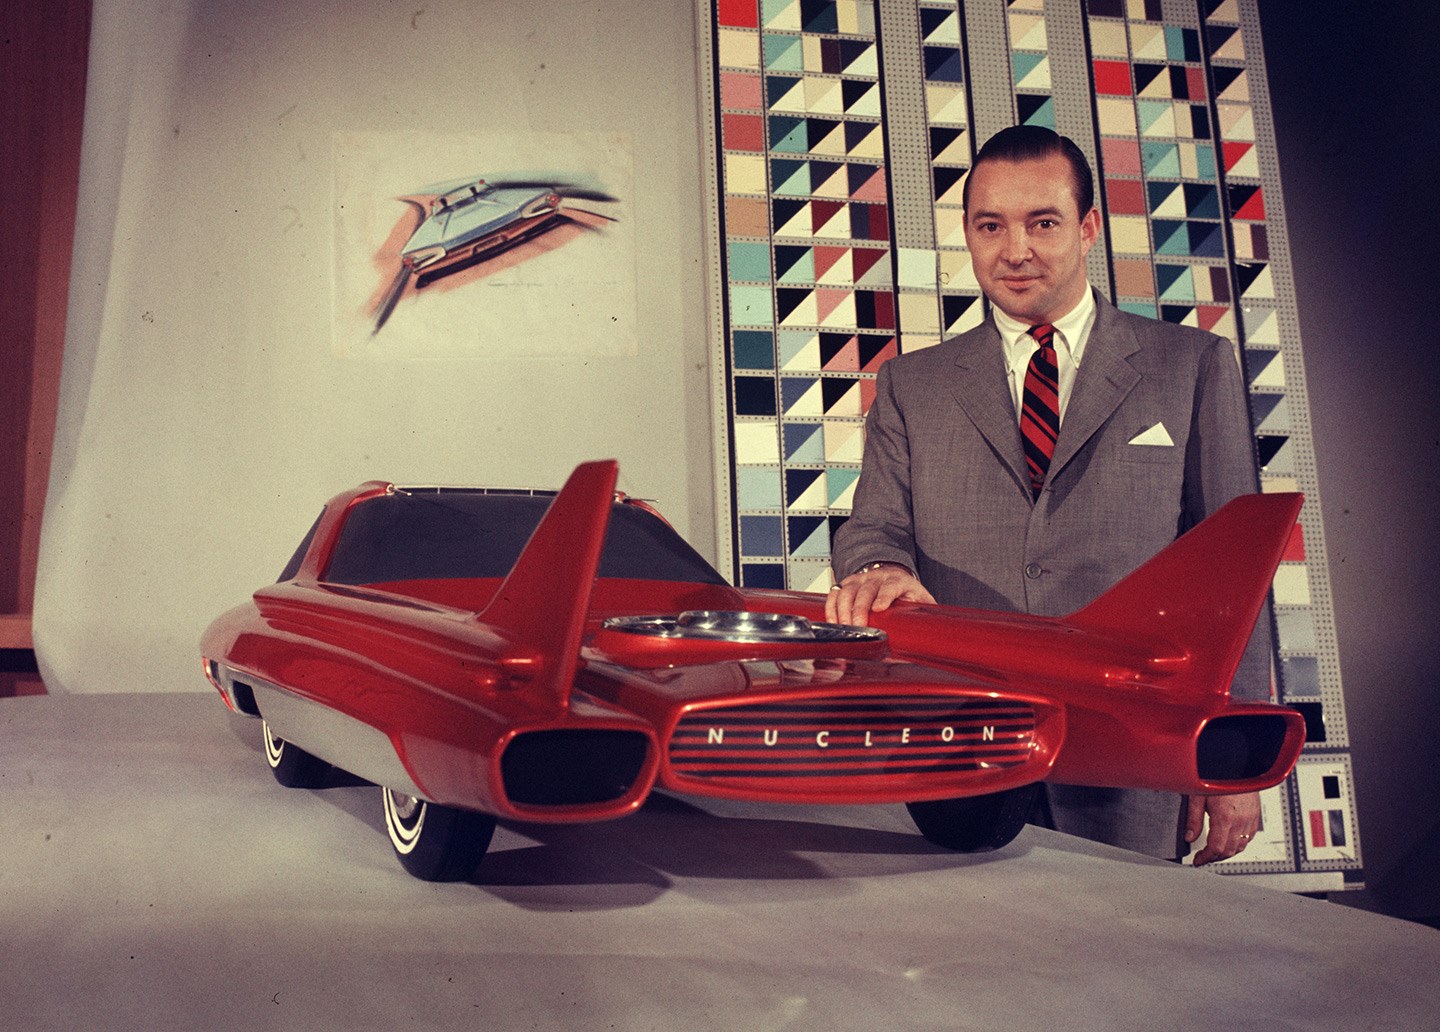 Car magnate, William Ford stand with his hand on a red model of Ford company